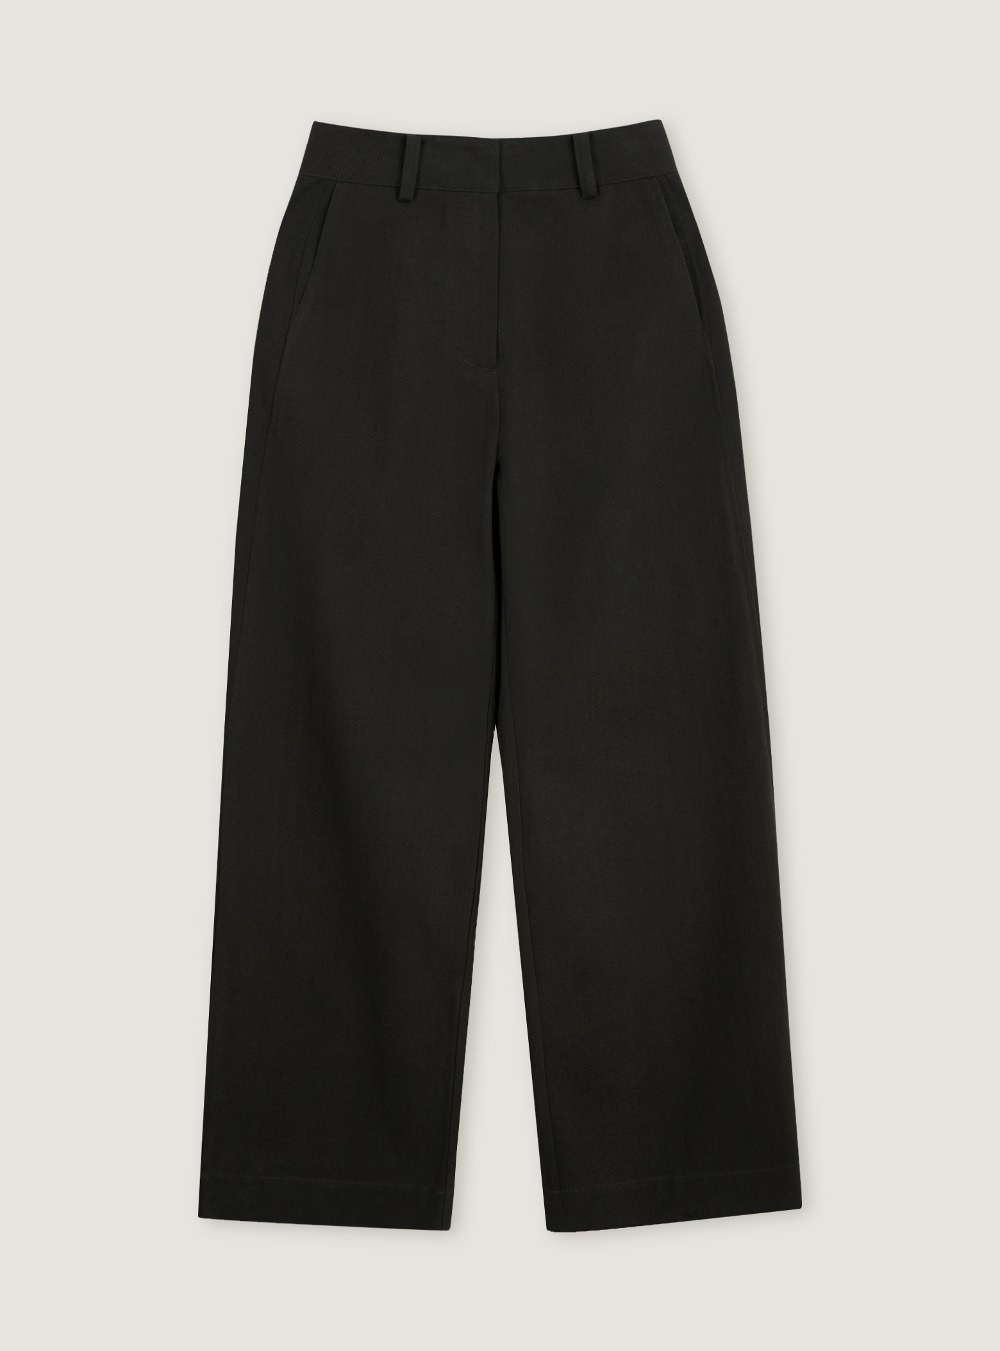 2ND_BUCKLE COTTON PANTS - CHARCOAL